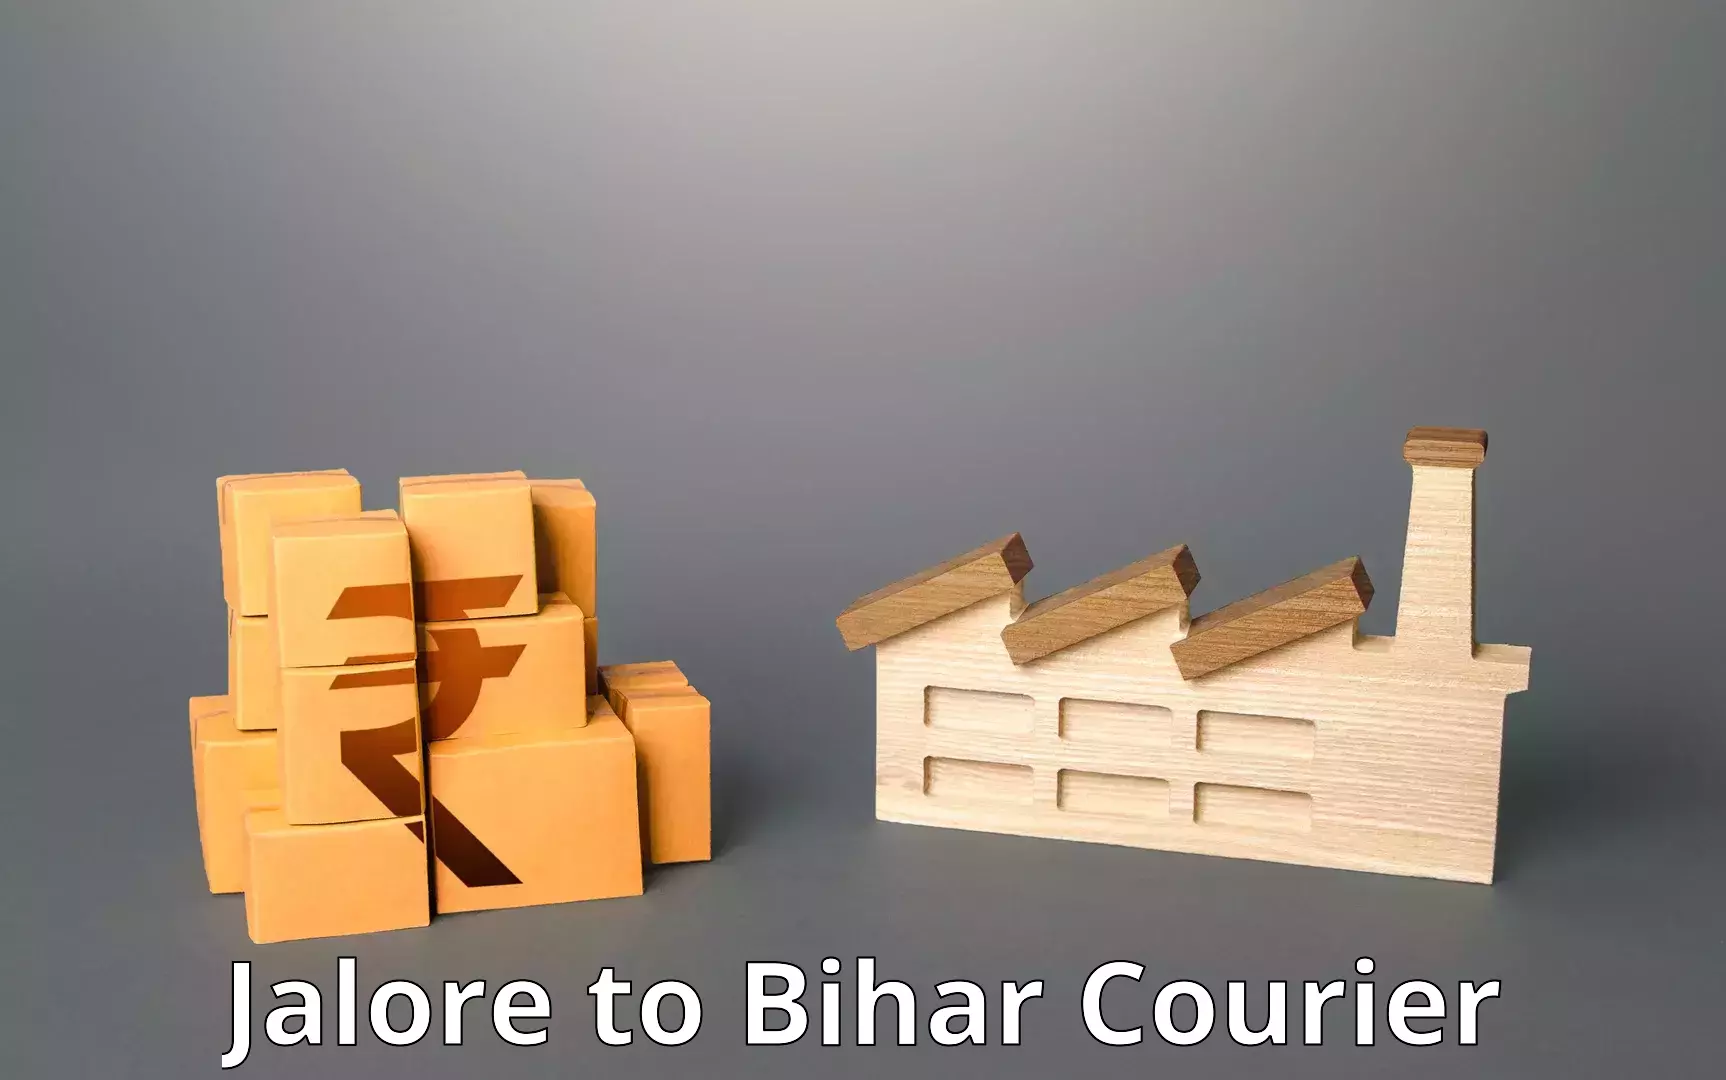 Reliable courier service Jalore to Bihar